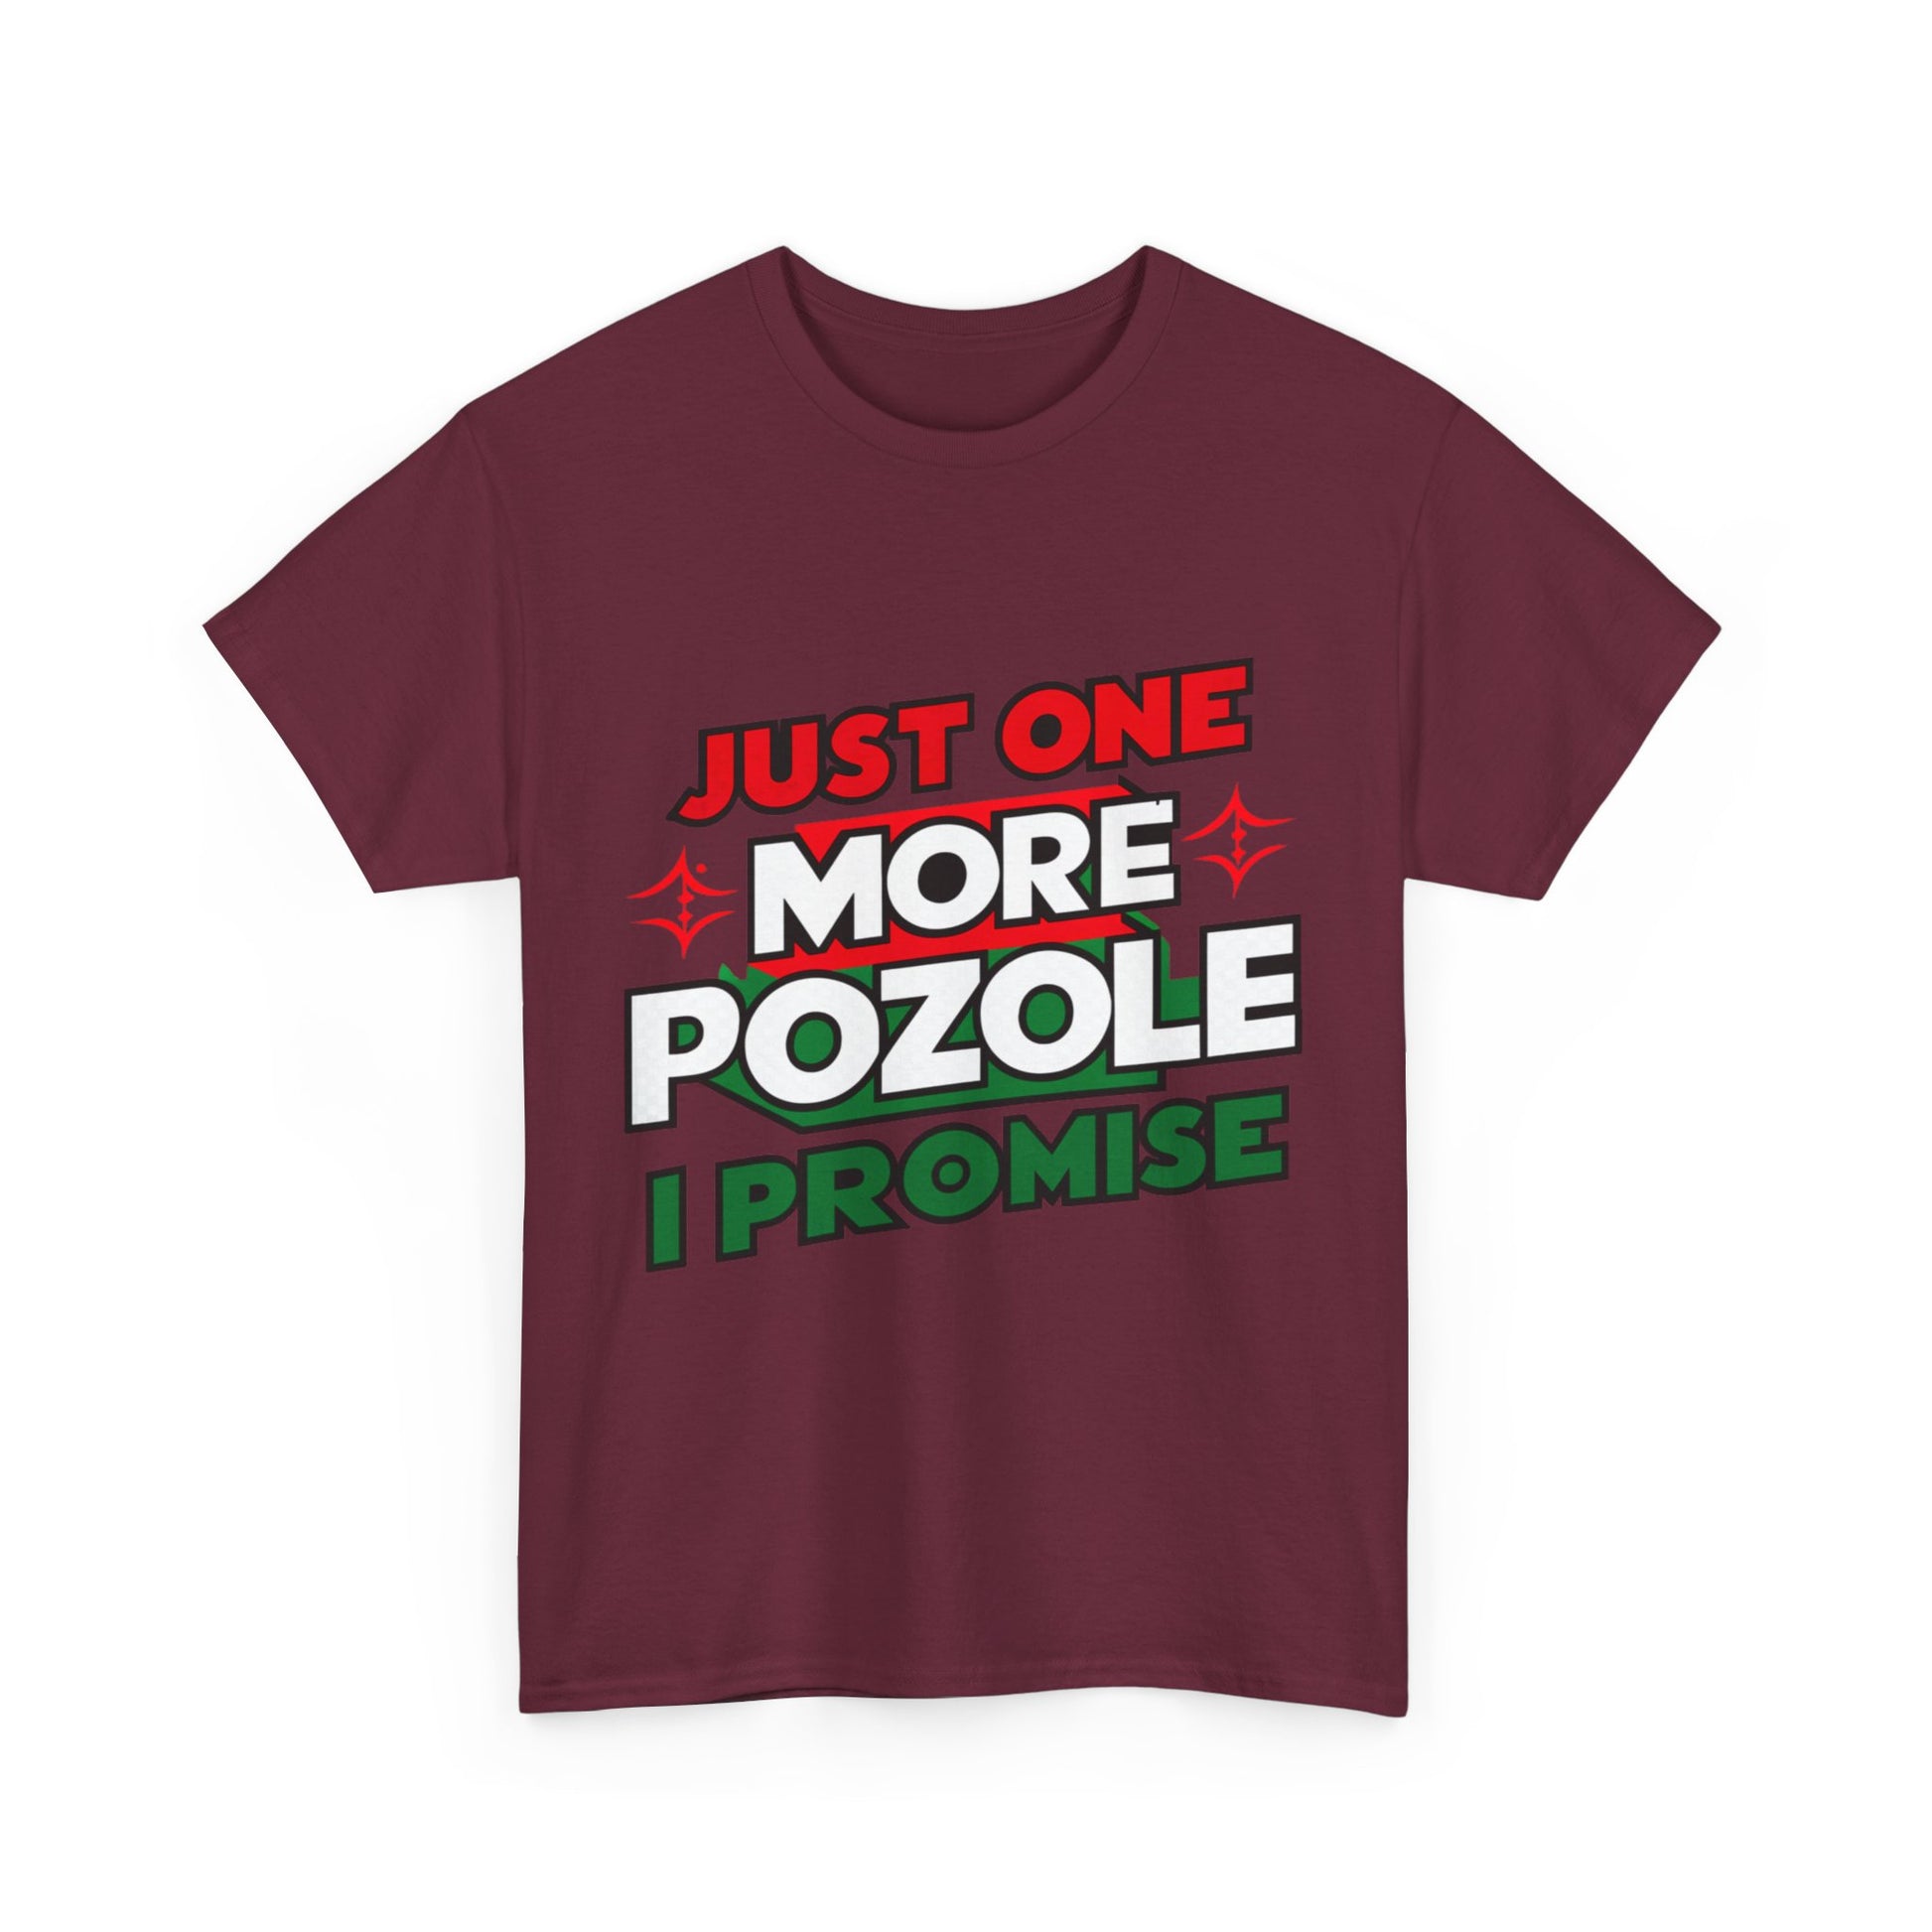 Just One More Pozole I Promise Mexican Food Graphic Unisex Heavy Cotton Tee Cotton Funny Humorous Graphic Soft Premium Unisex Men Women Maroon T-shirt Birthday Gift-27